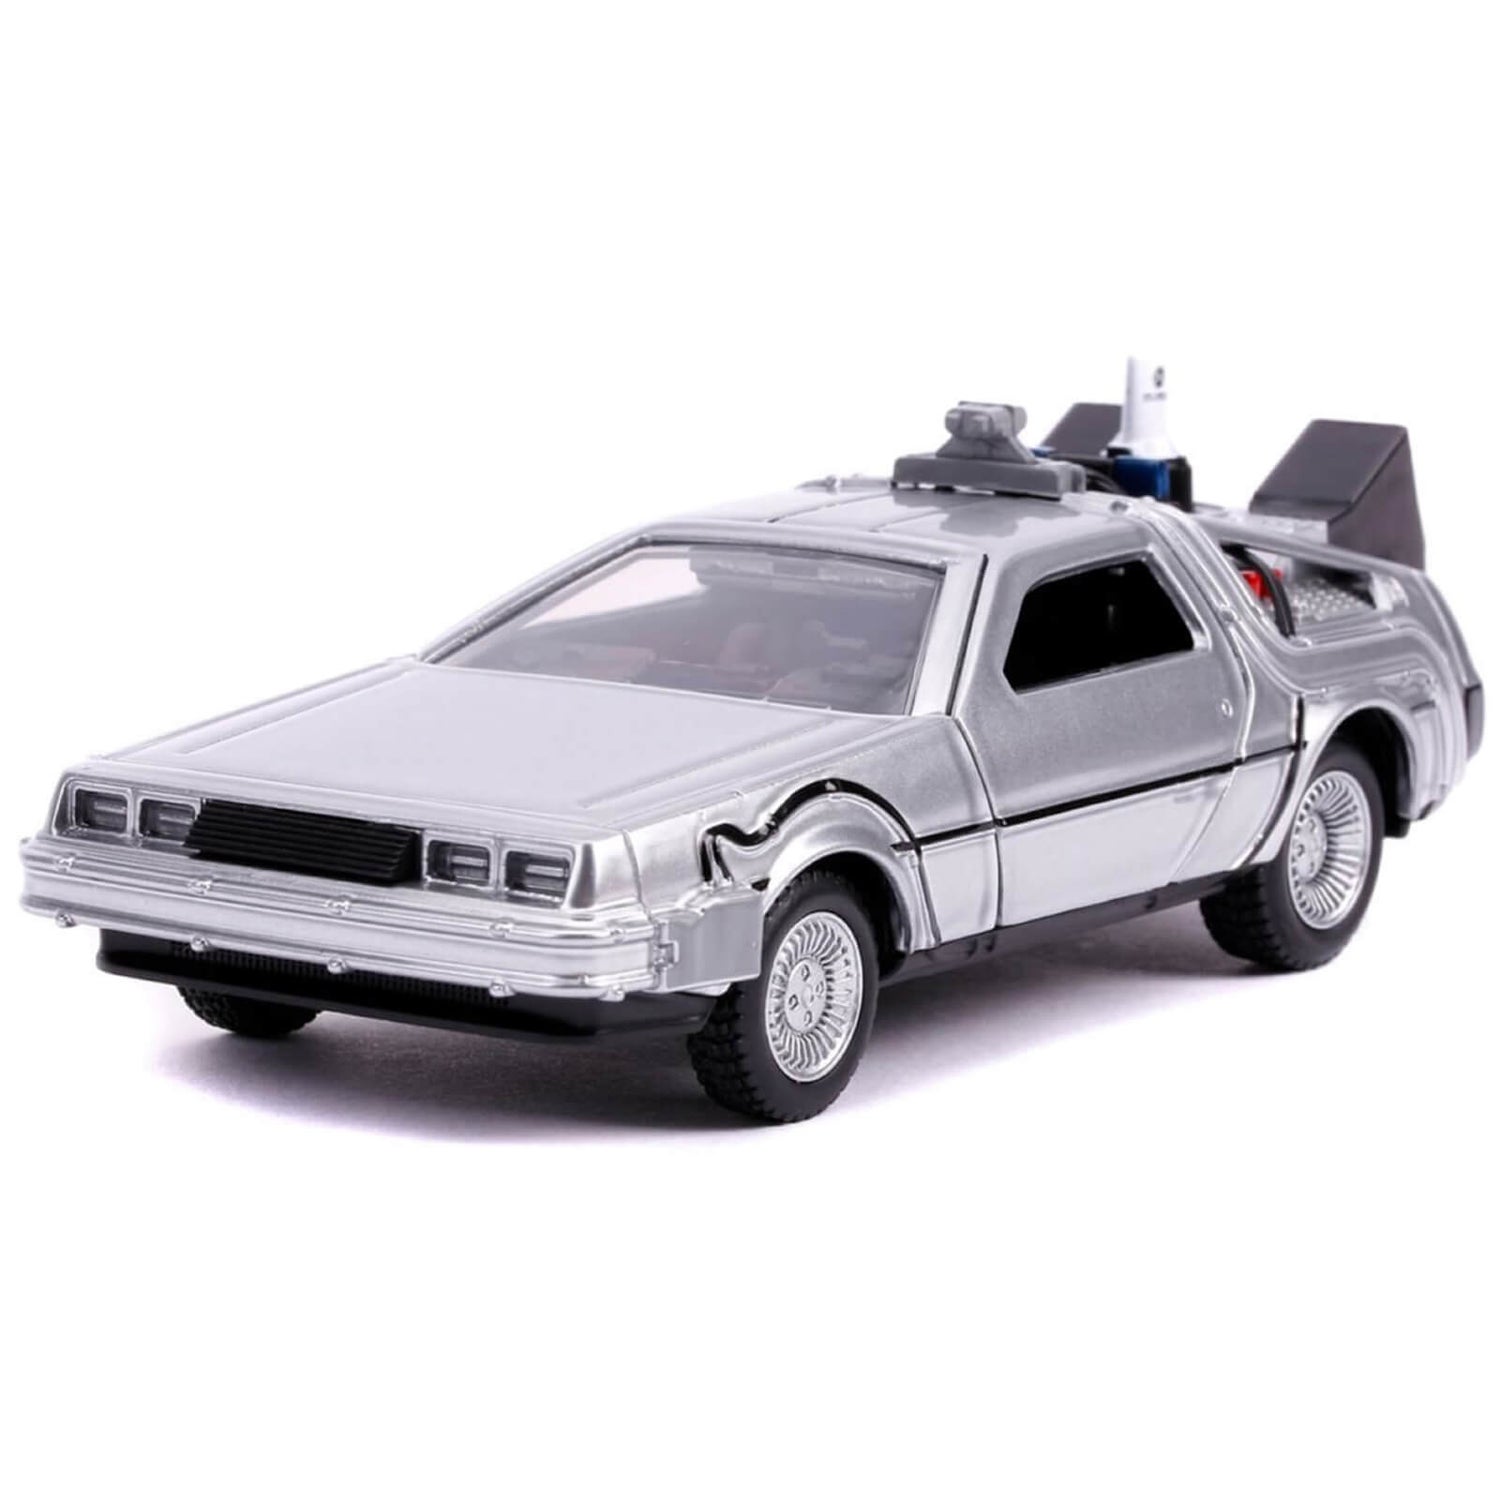 Jada Toys Back To The Future Part II 1:32 Scale Die Cast Vehicle - Time Machine